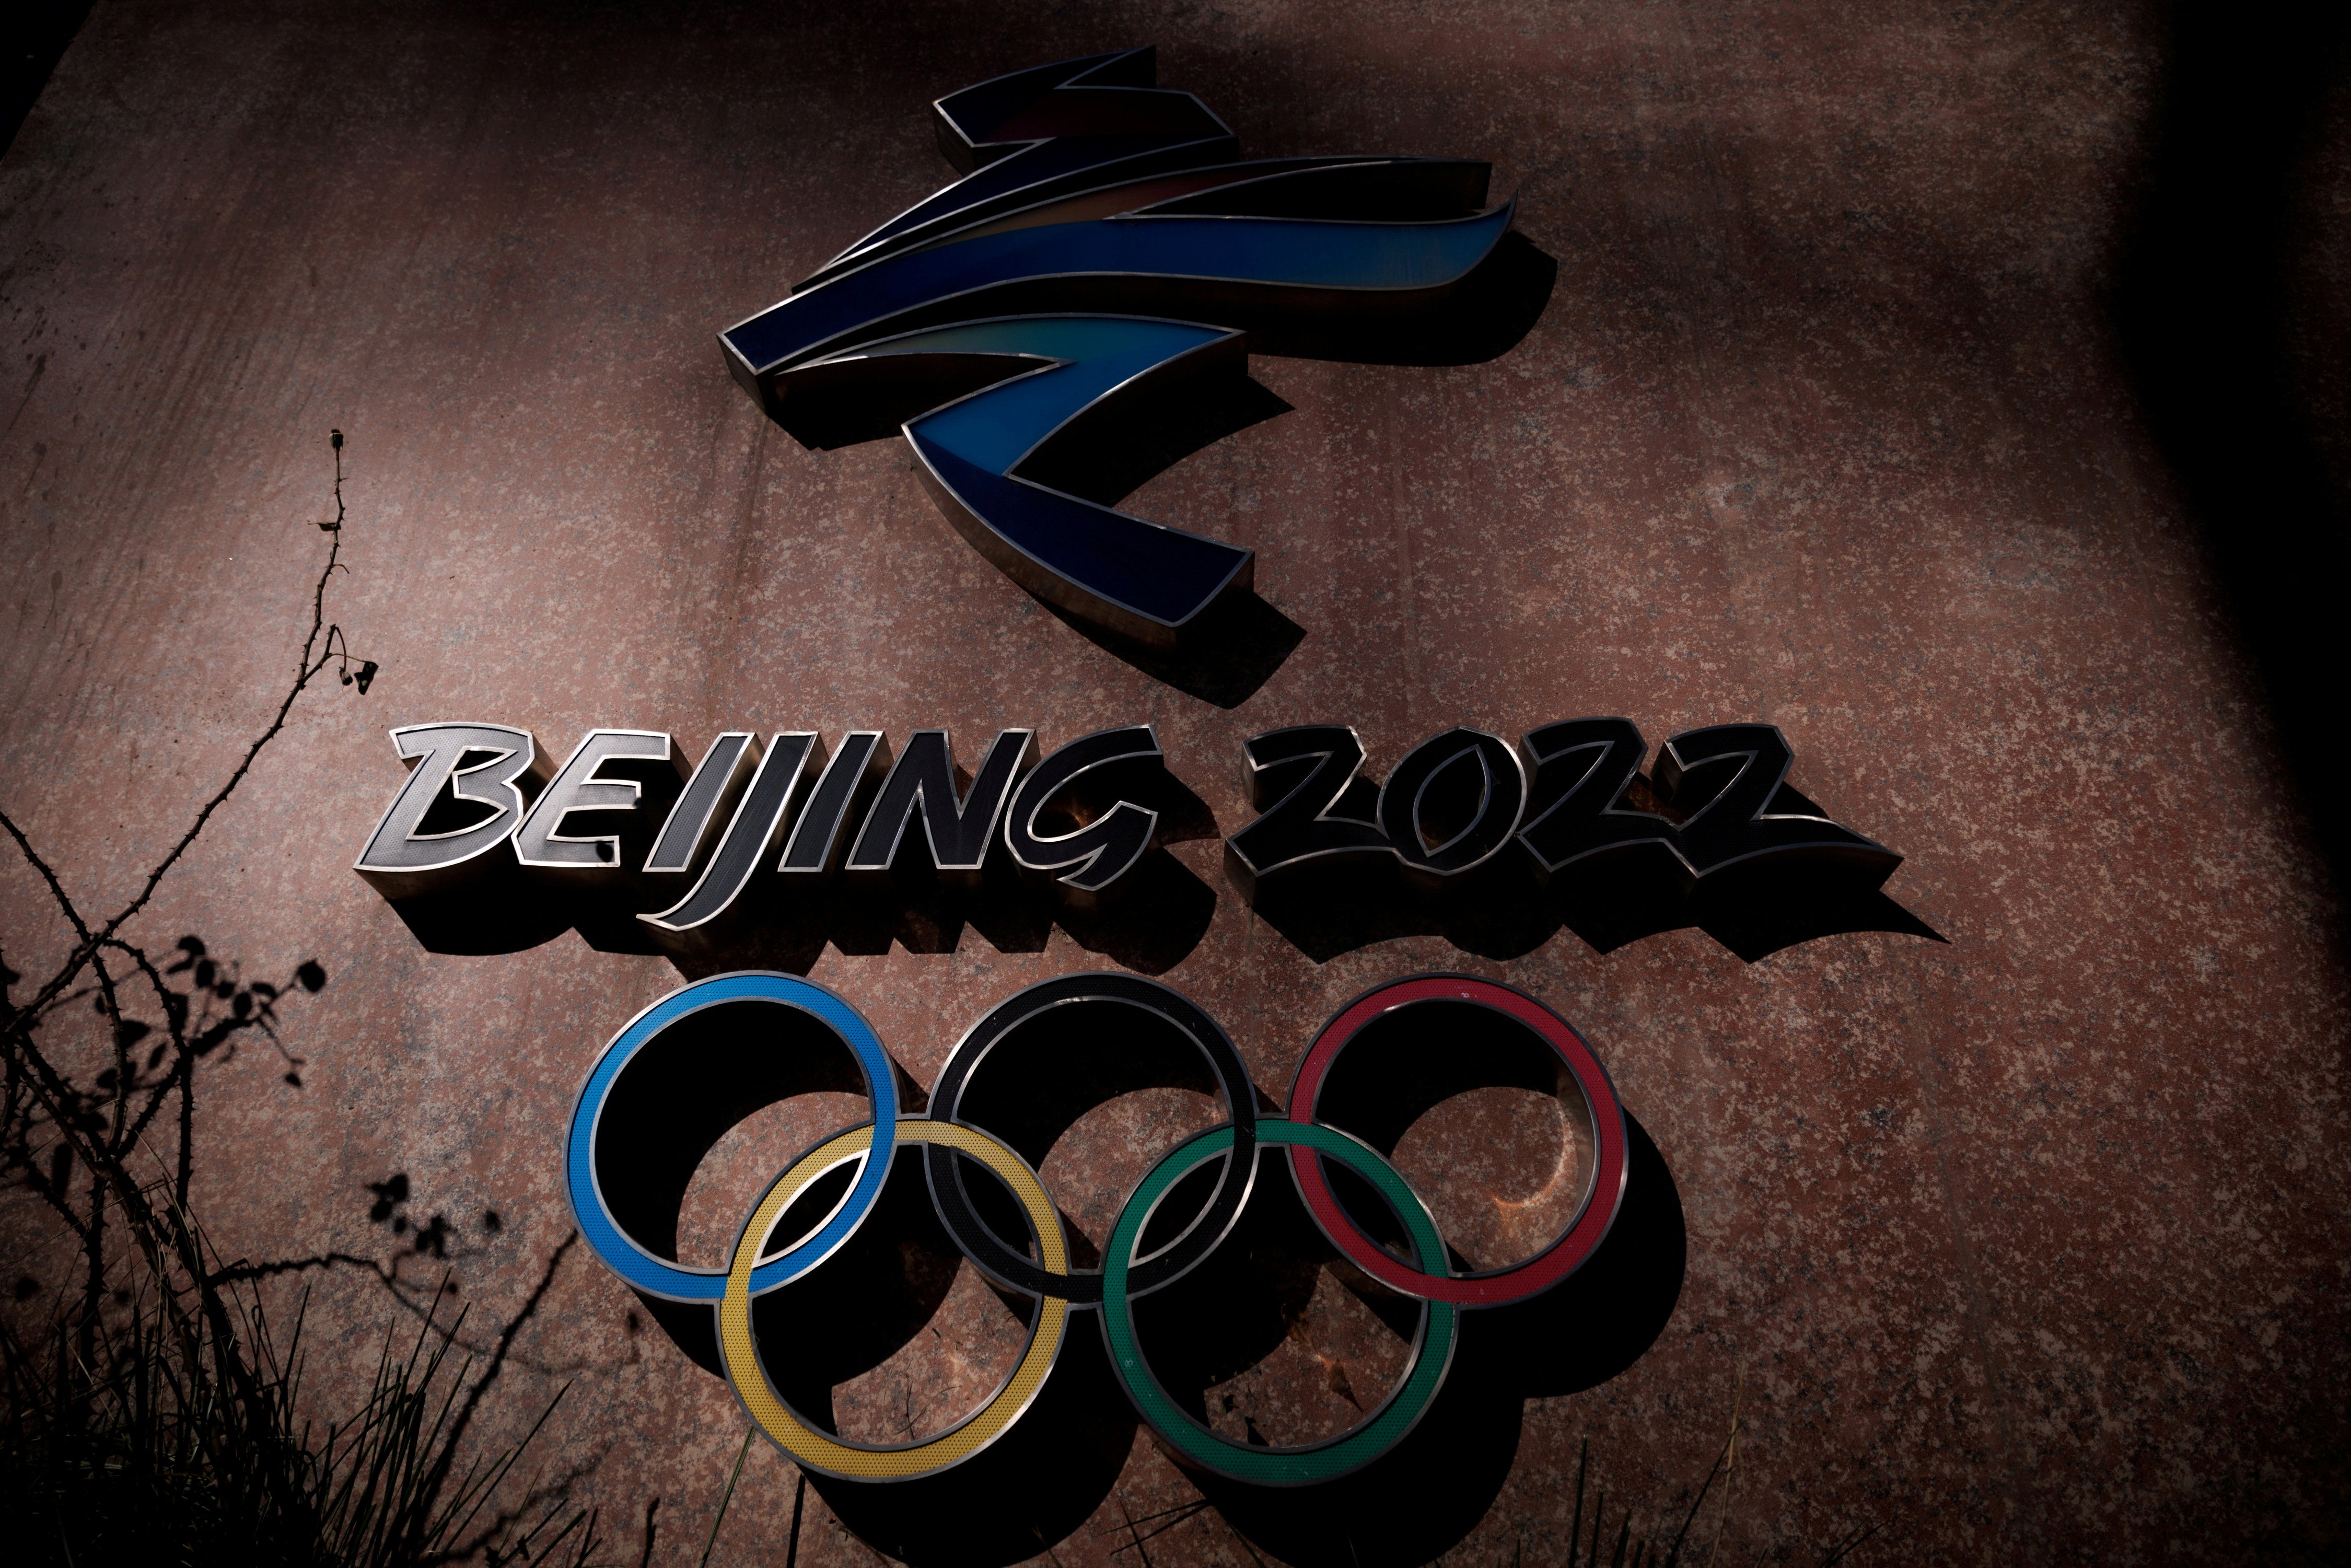 The US will not be sending any officials to the 2022 Beijing Winter Olympics